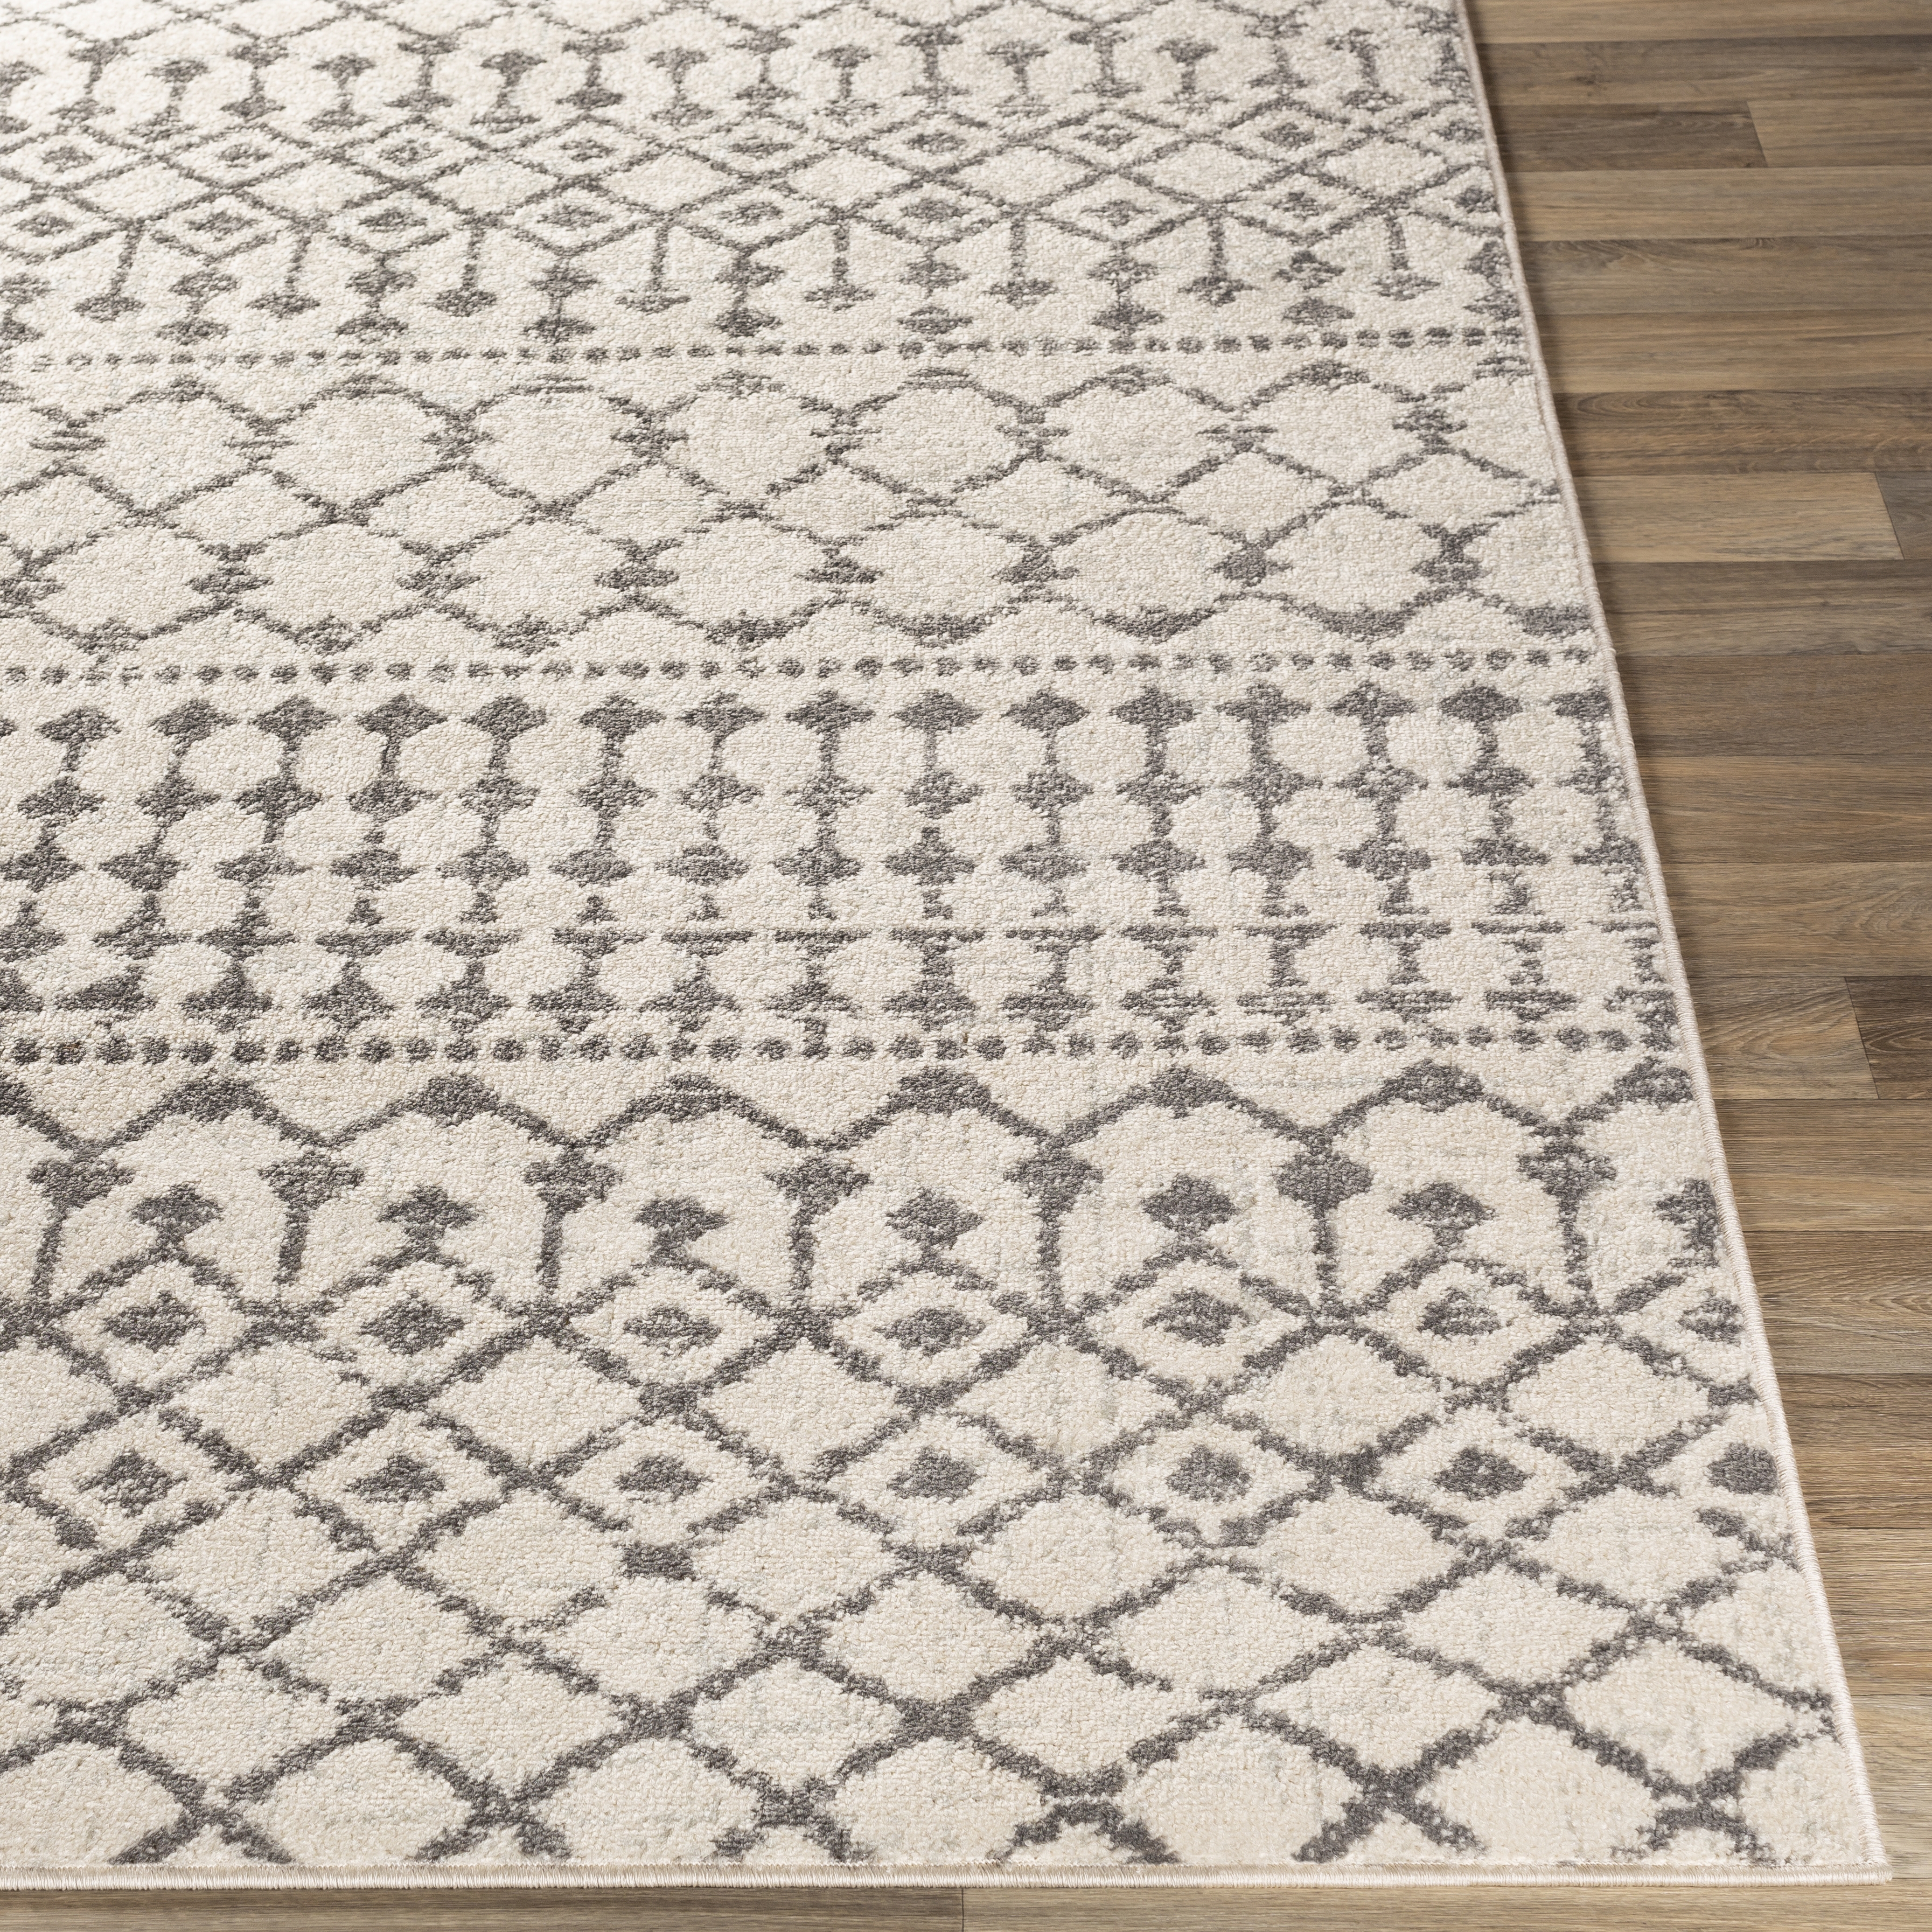 Chester Rug, 9' x 12' - Image 2